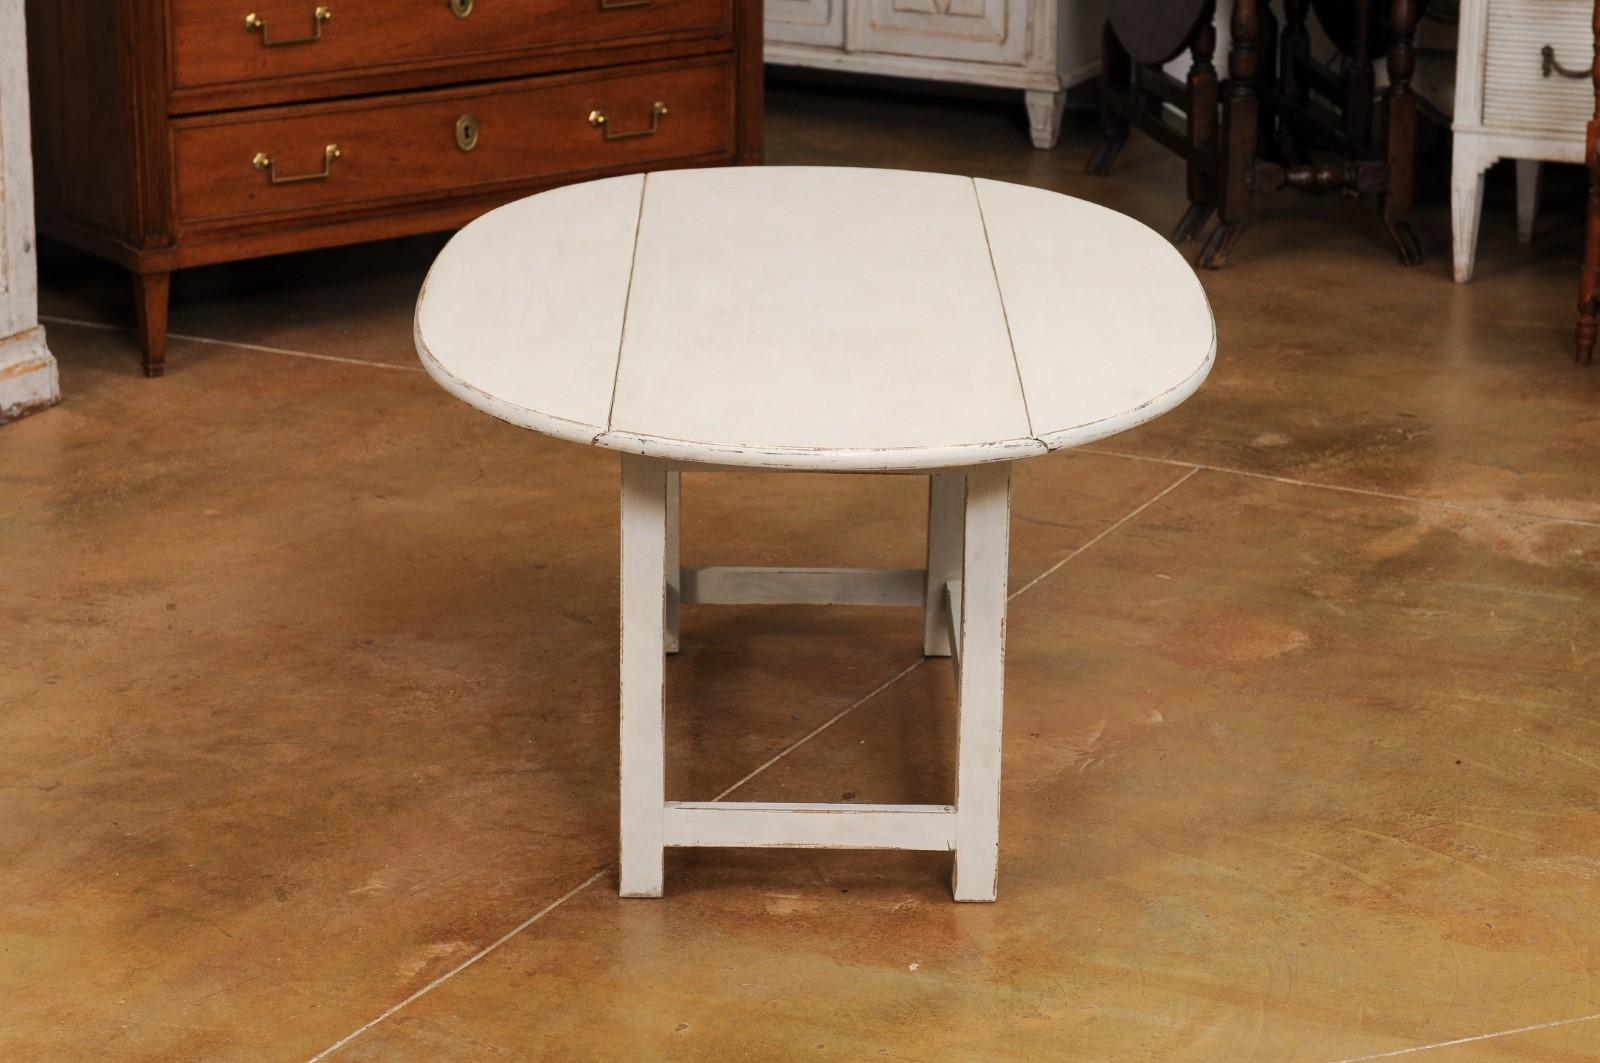 Swedish Grey Painted Oval Top Drop Leaf Coffee Table from the 20th Century For Sale 3